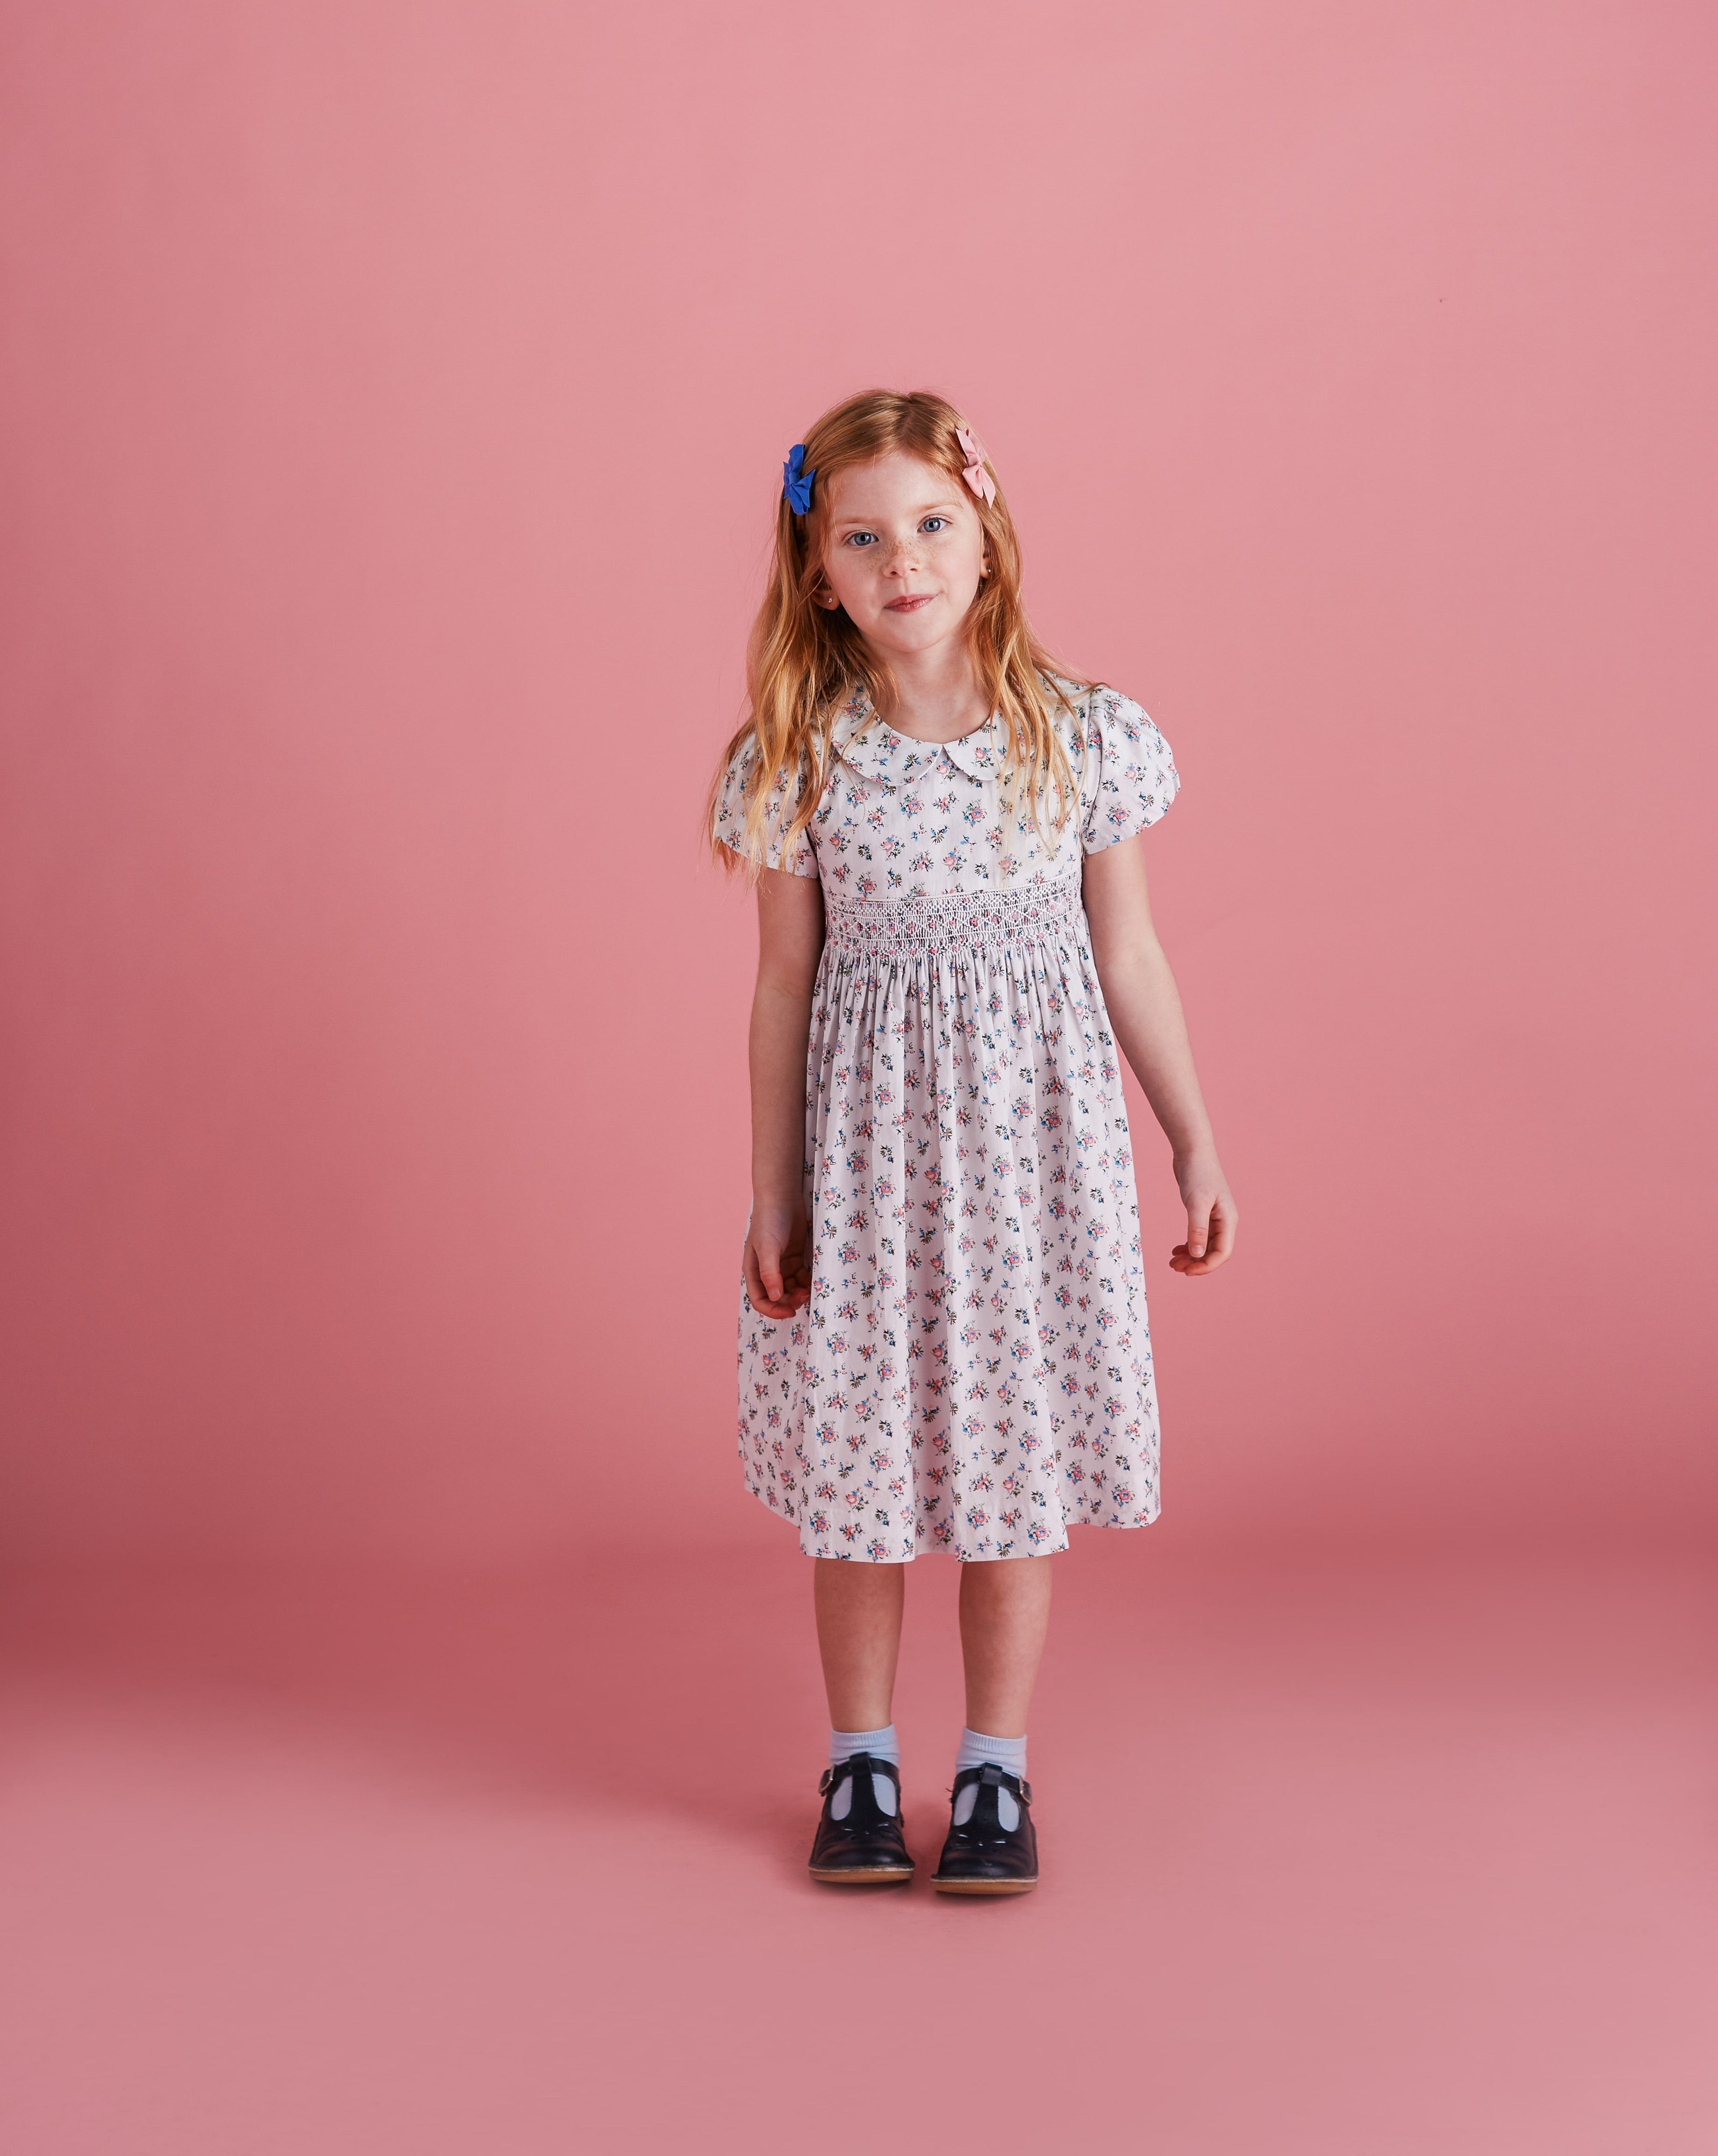 girl wearing smocked dress made from floral fabric